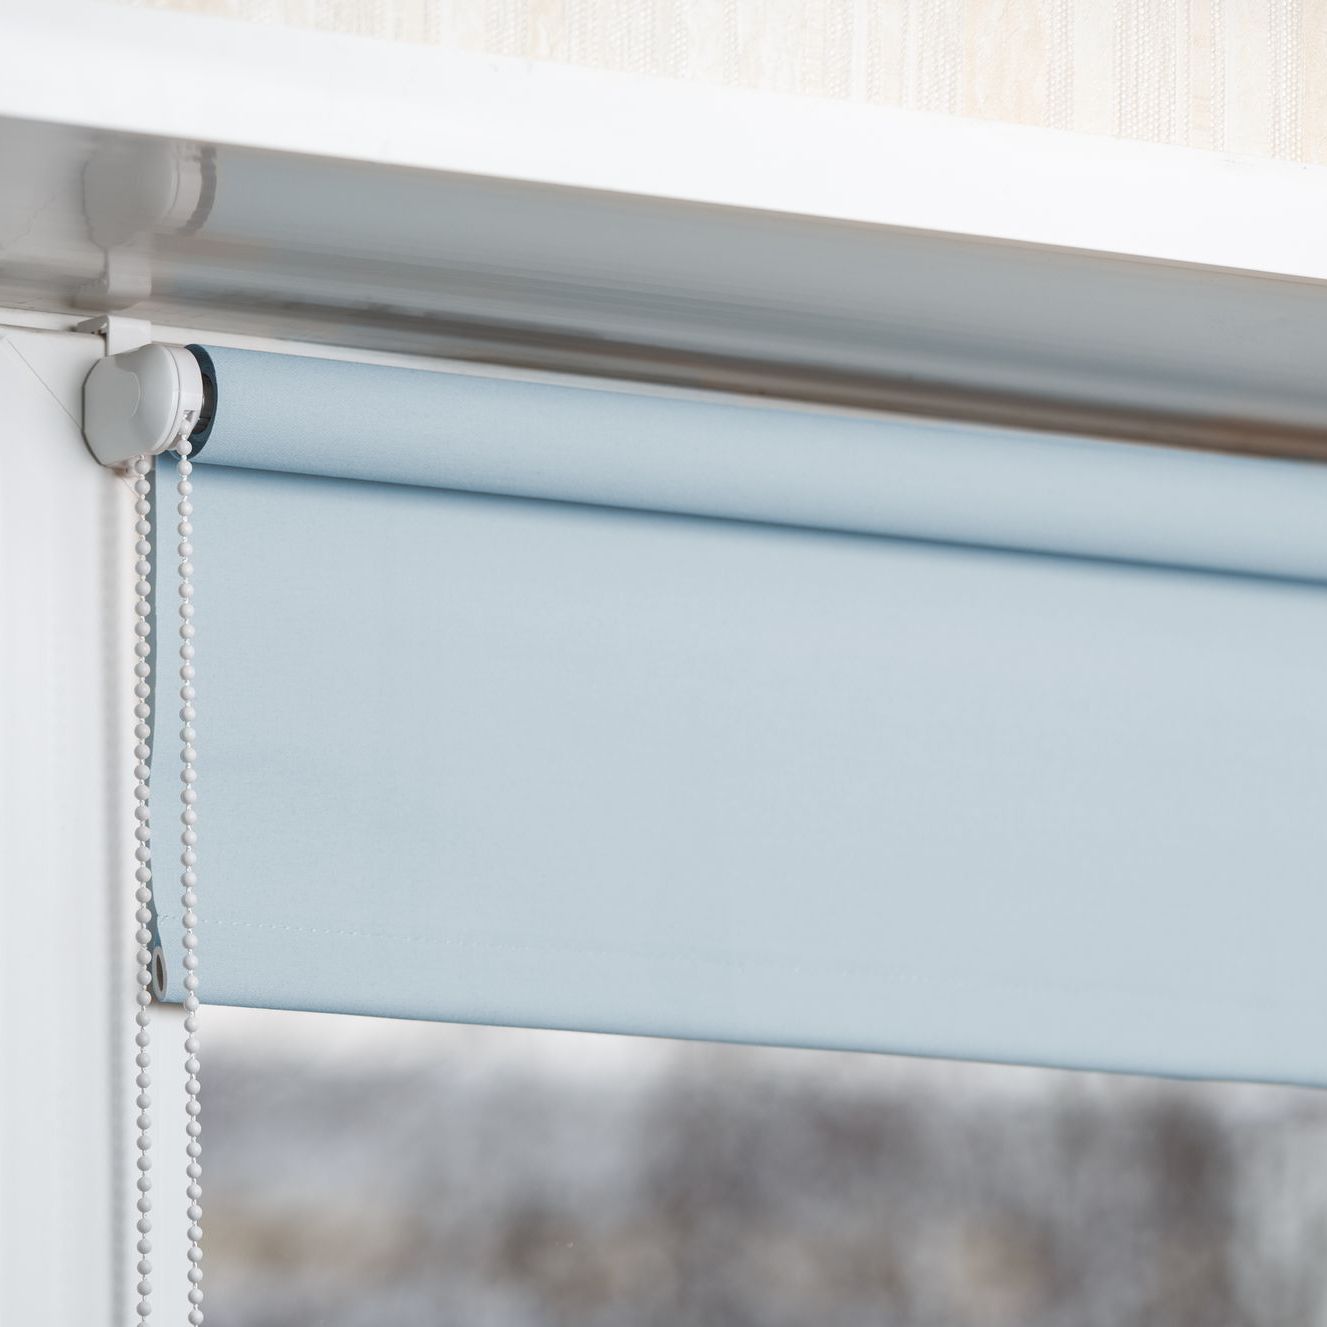 A light blue roller blind is hanging on a window